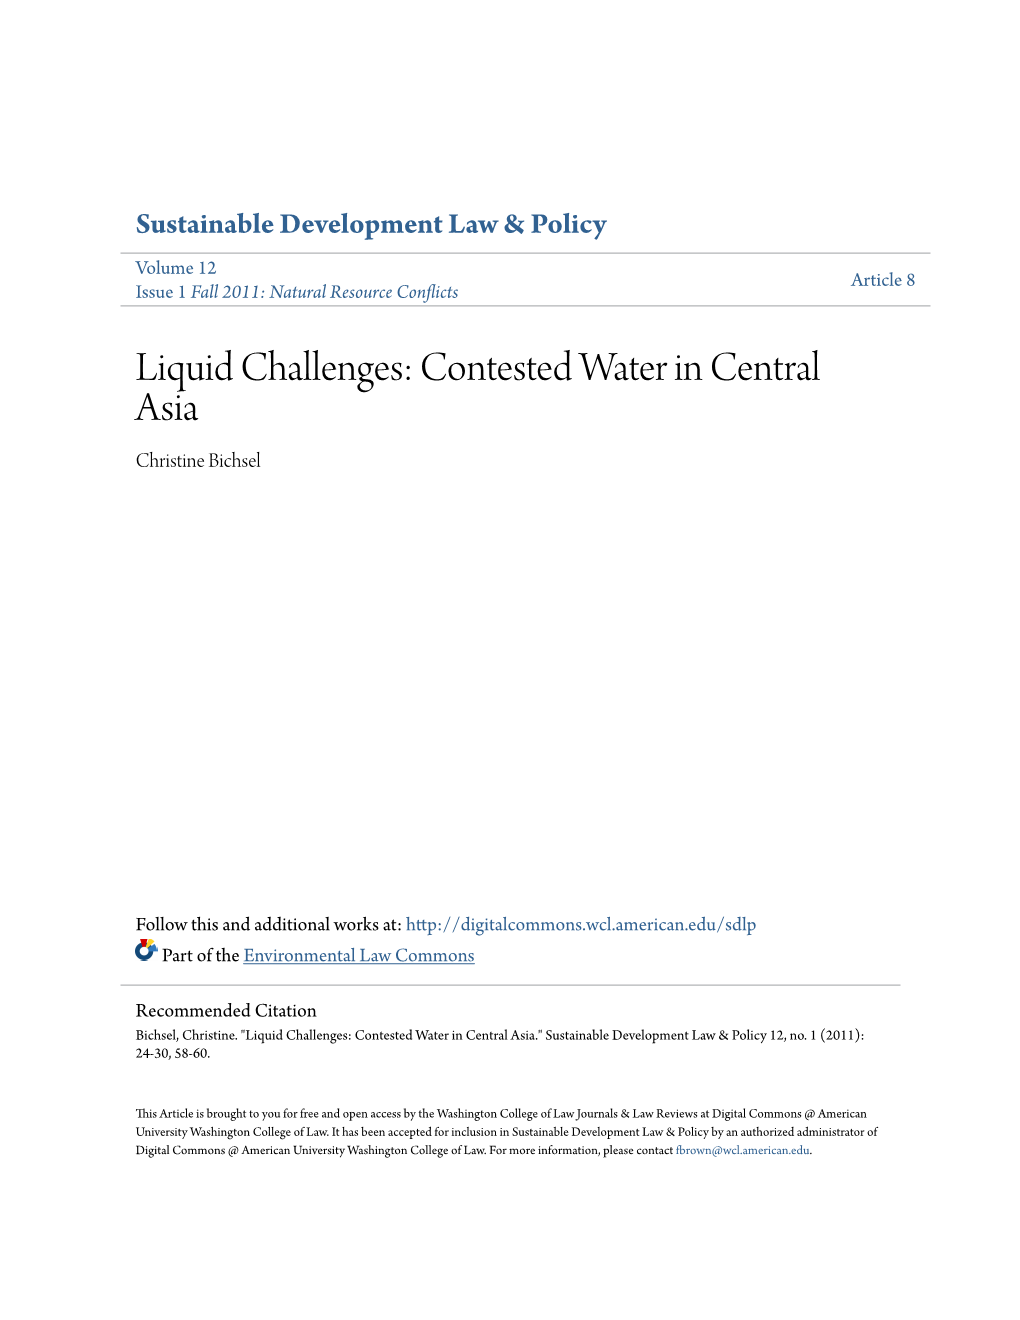 Contested Water in Central Asia Christine Bichsel